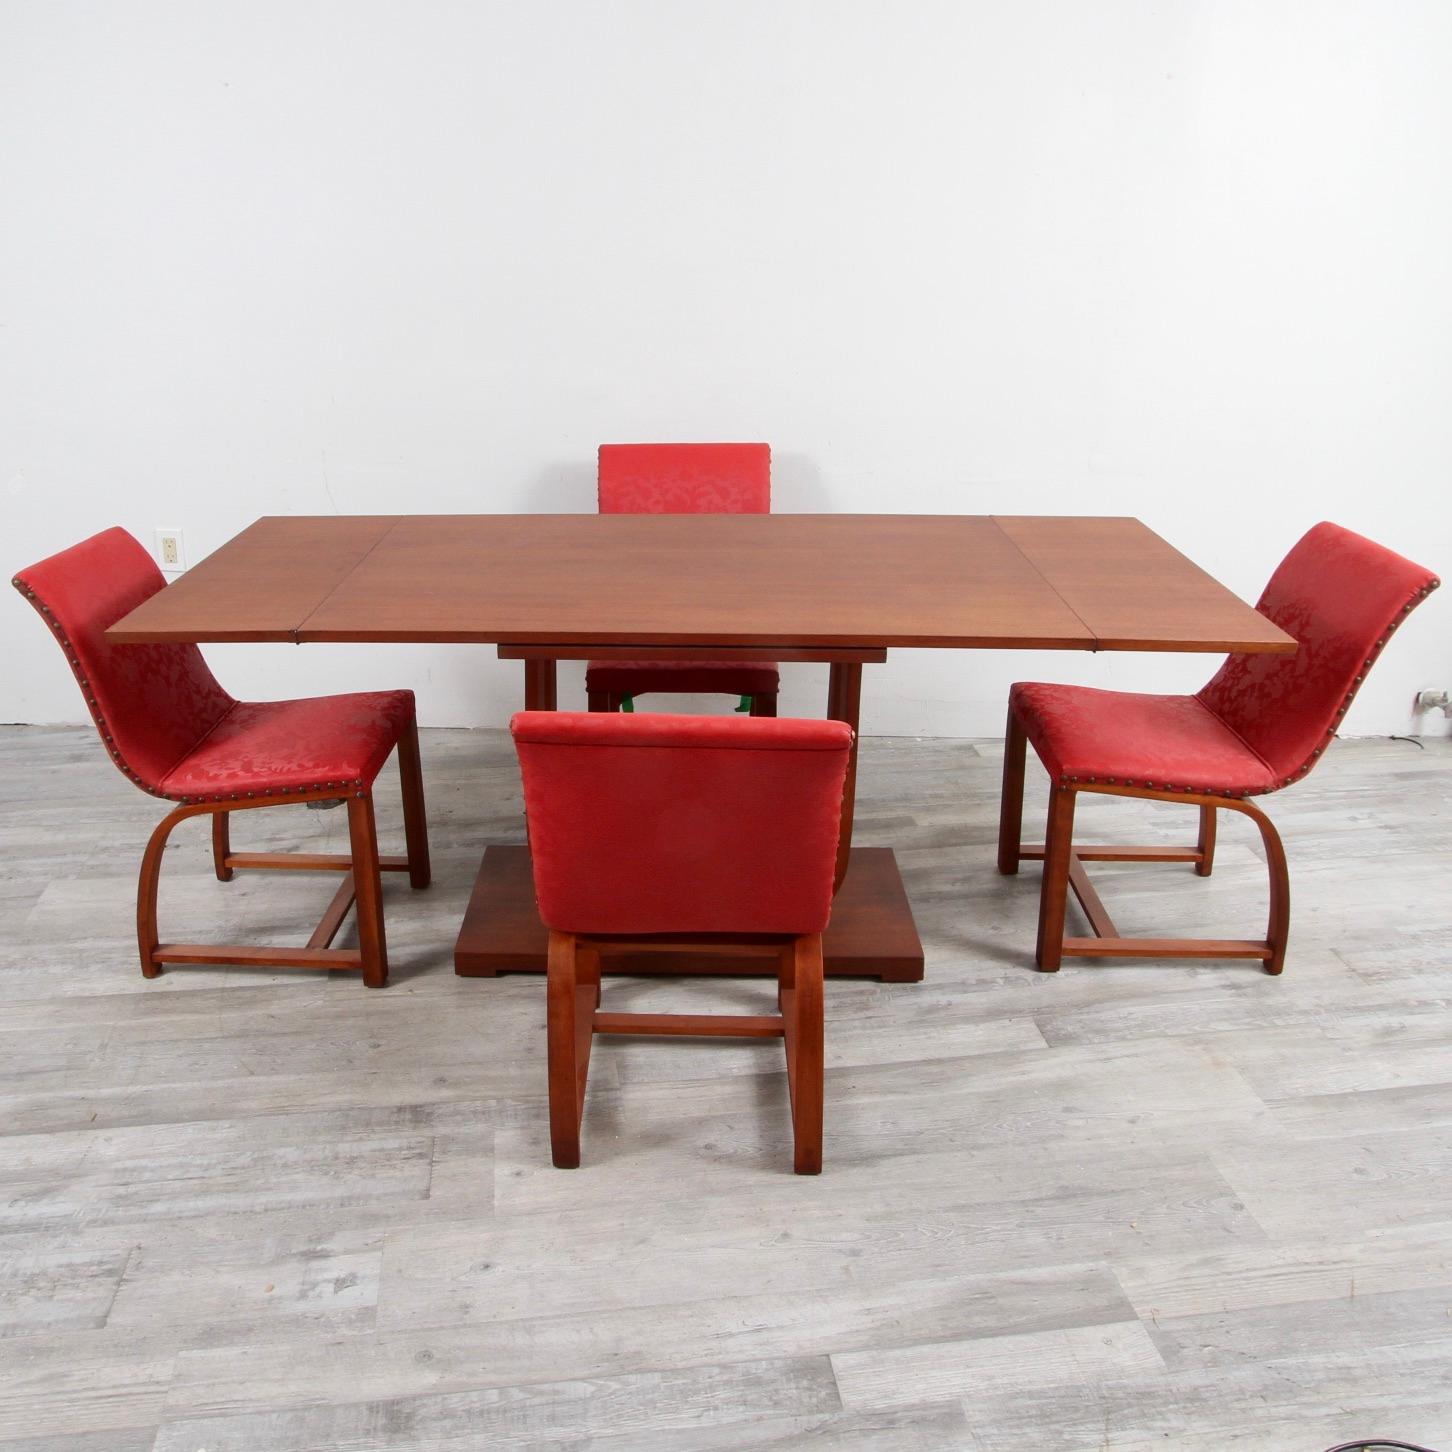 A walnut extension dining table designed by furniture and industrial designer Gilbert Rohde for Heywood Wakefield in the late 30s. This table came out of the original purchasers home. This came with the original 4 dining chairs that are in a